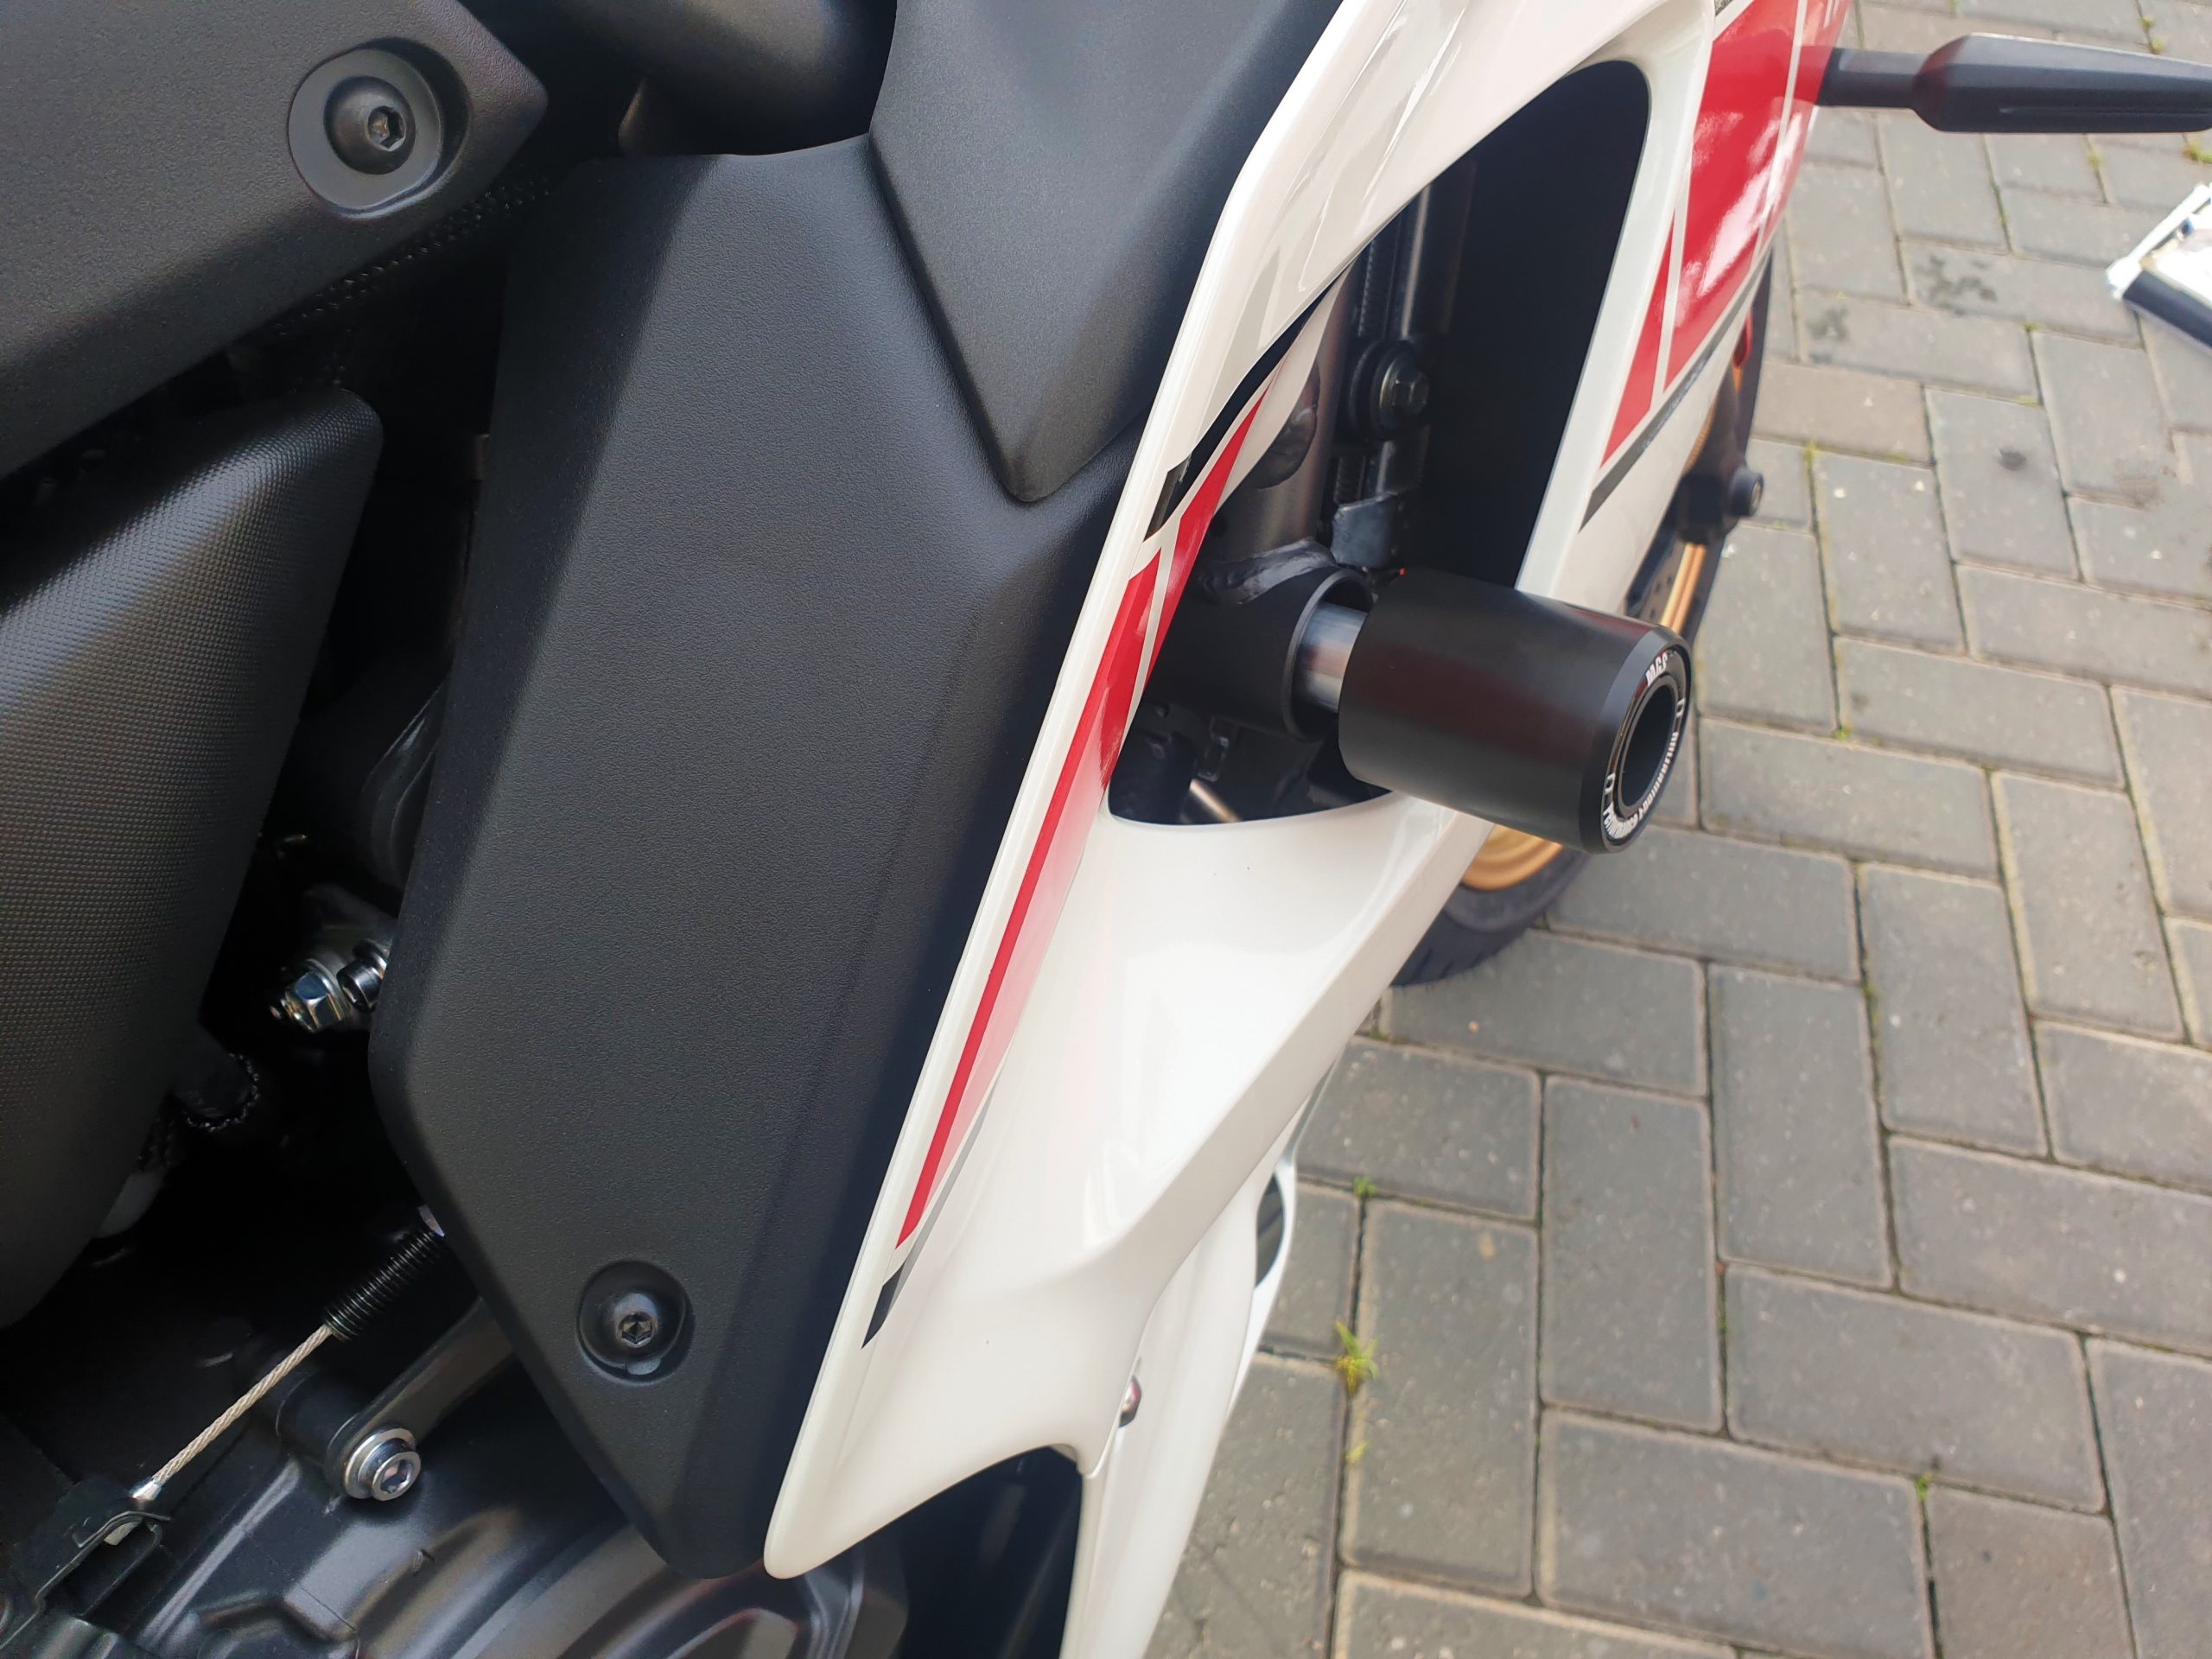 MGS Performance Engineering Motorcycle Crash Protection